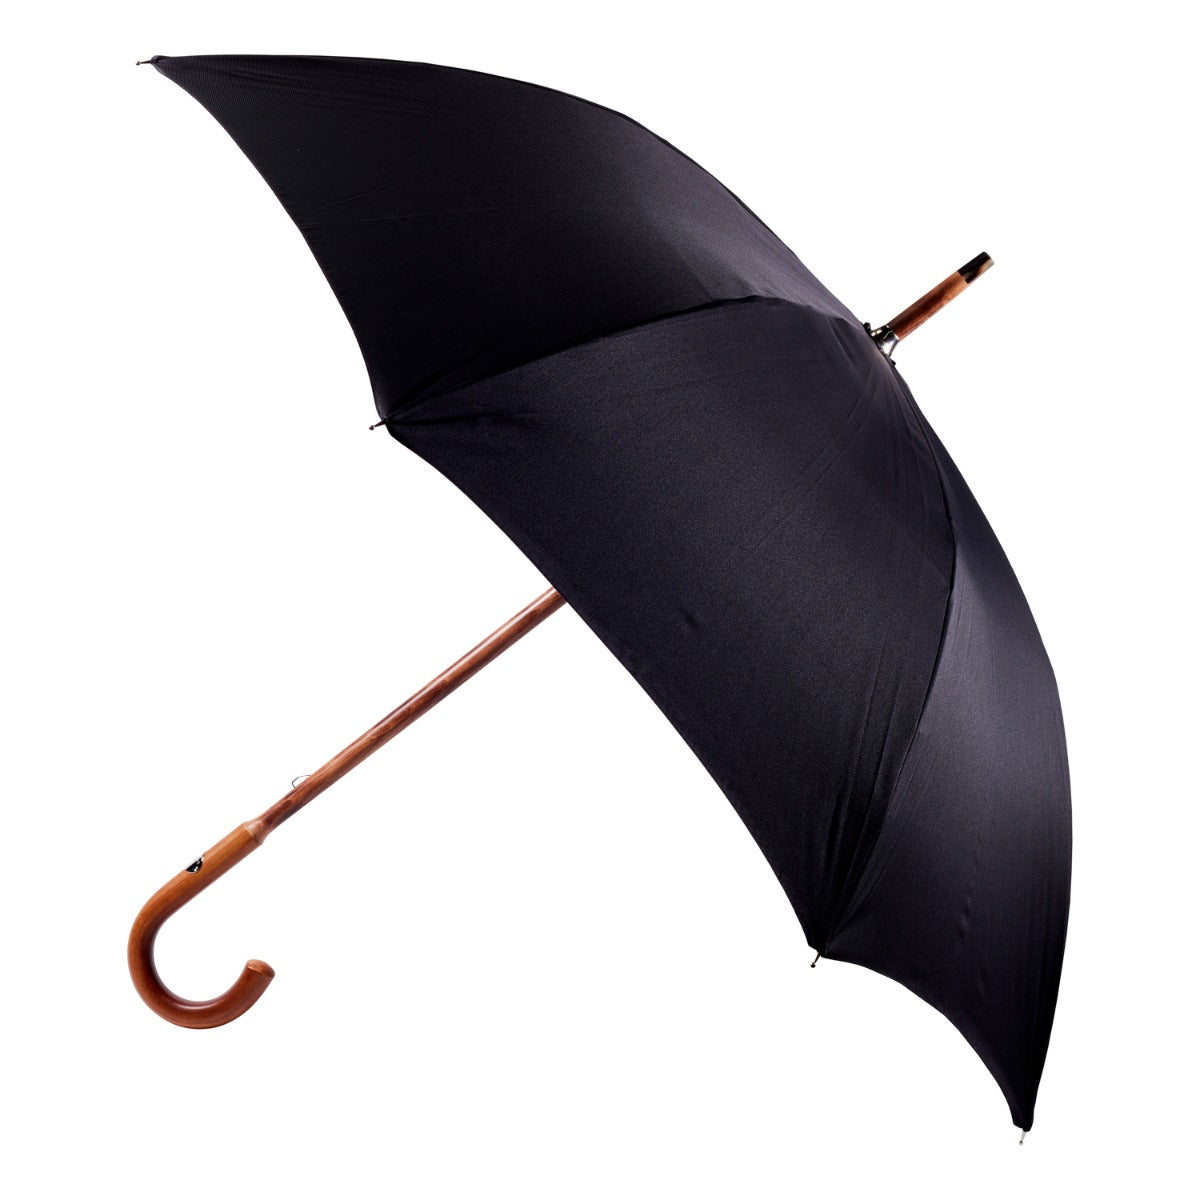 A handcrafted Black Canopy Umbrella with Malacca Handle by KirbyAllison.com.